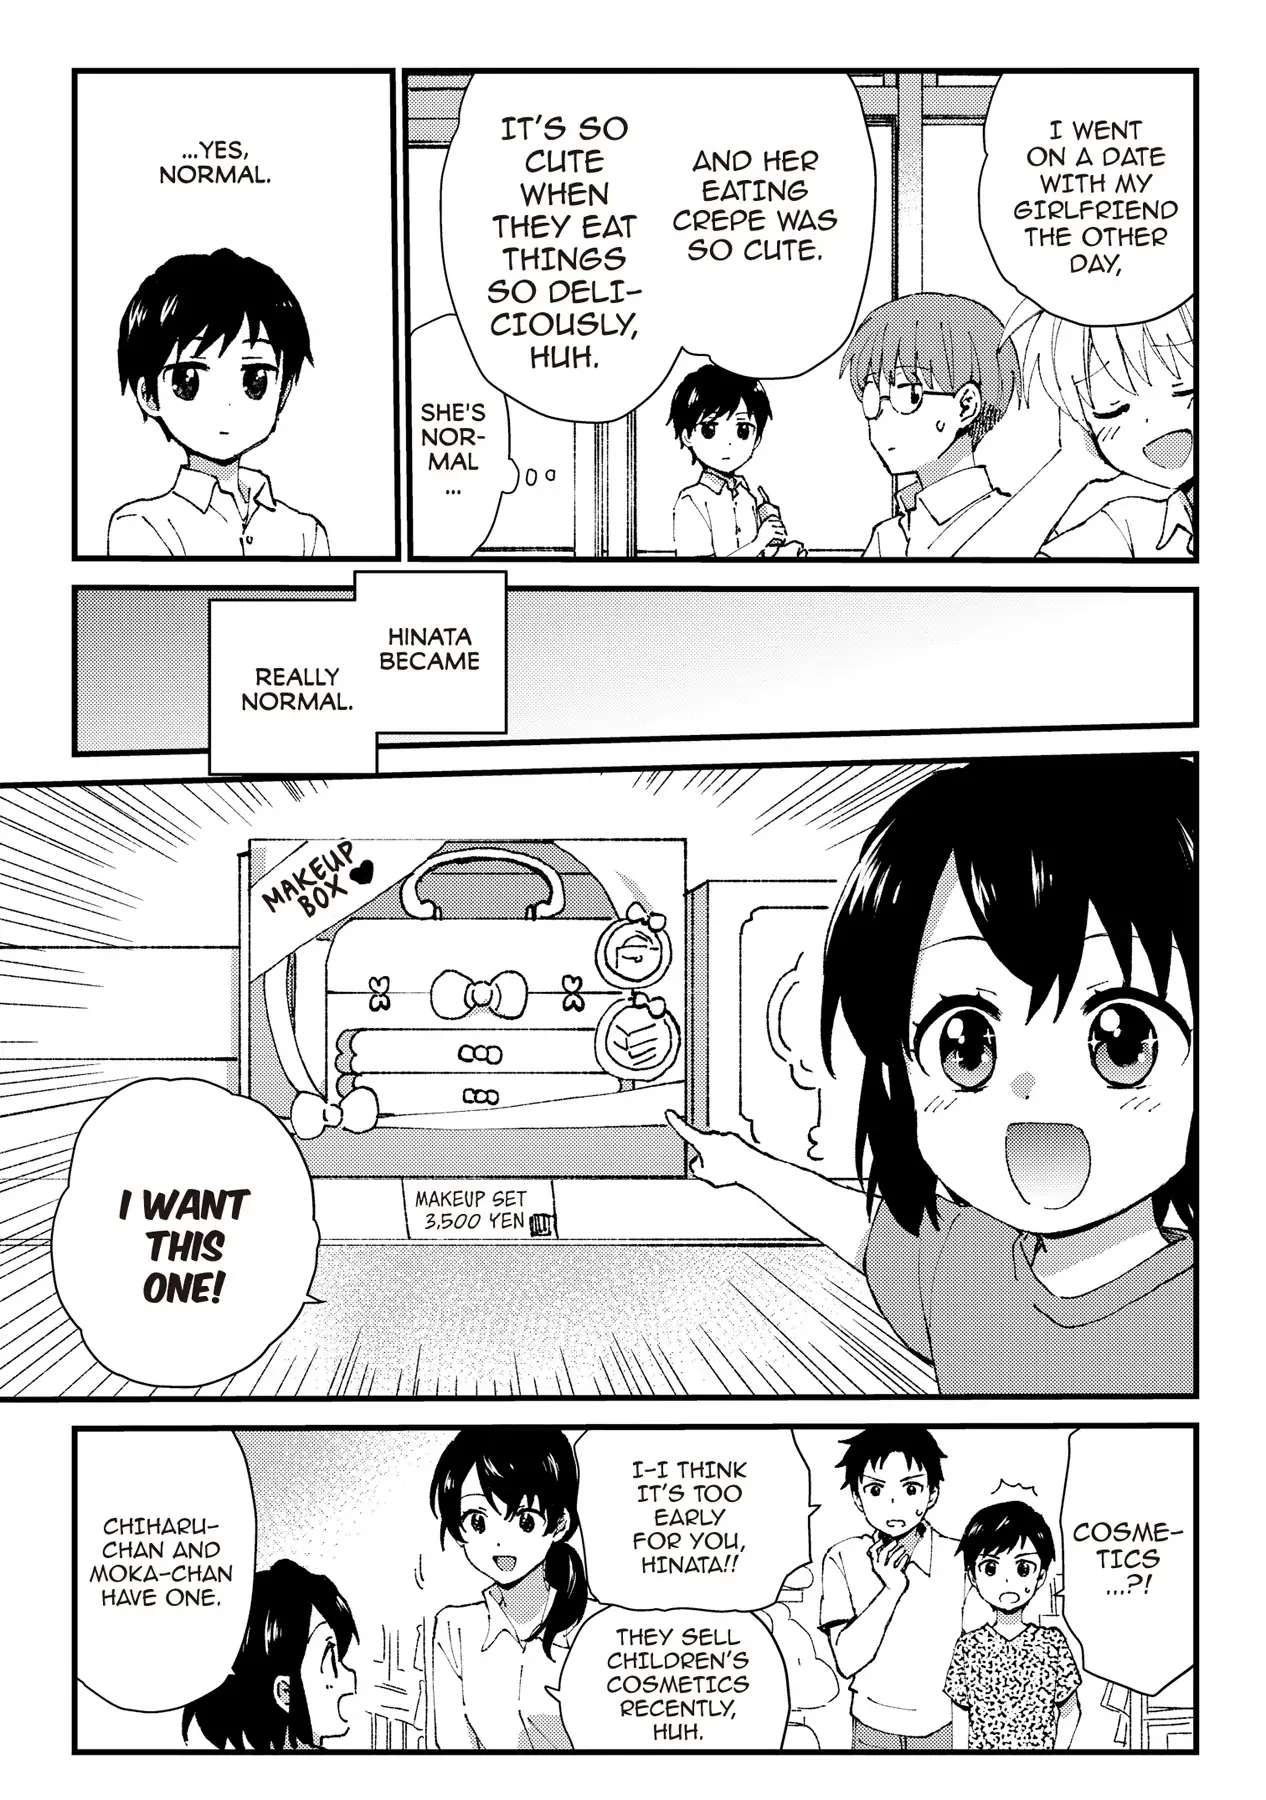 The Cute Little Granny Girl Hinata-chan - chapter 93.5 - #3